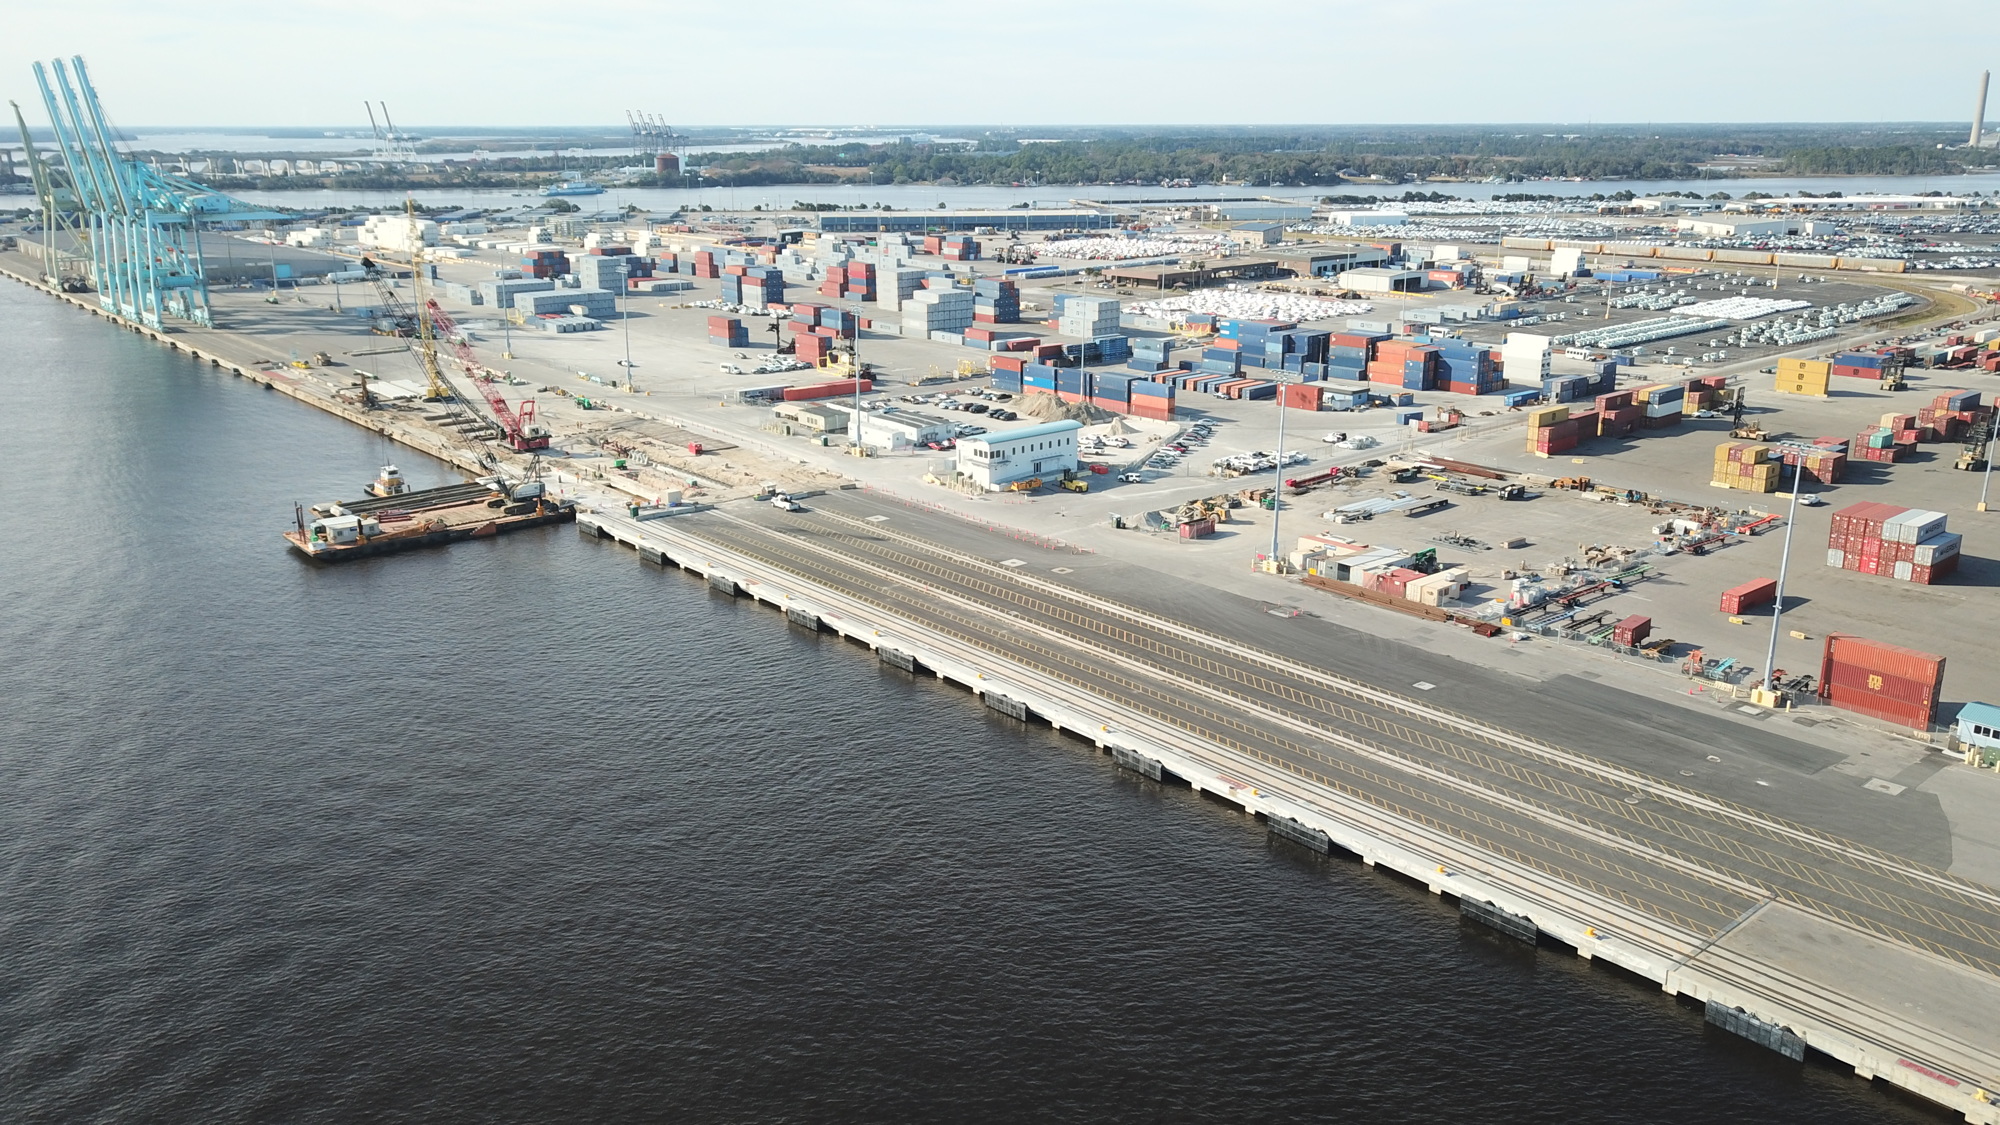 The project is part of $104 million in berth enhancements at the SSA Jacksonville Container Terminal.